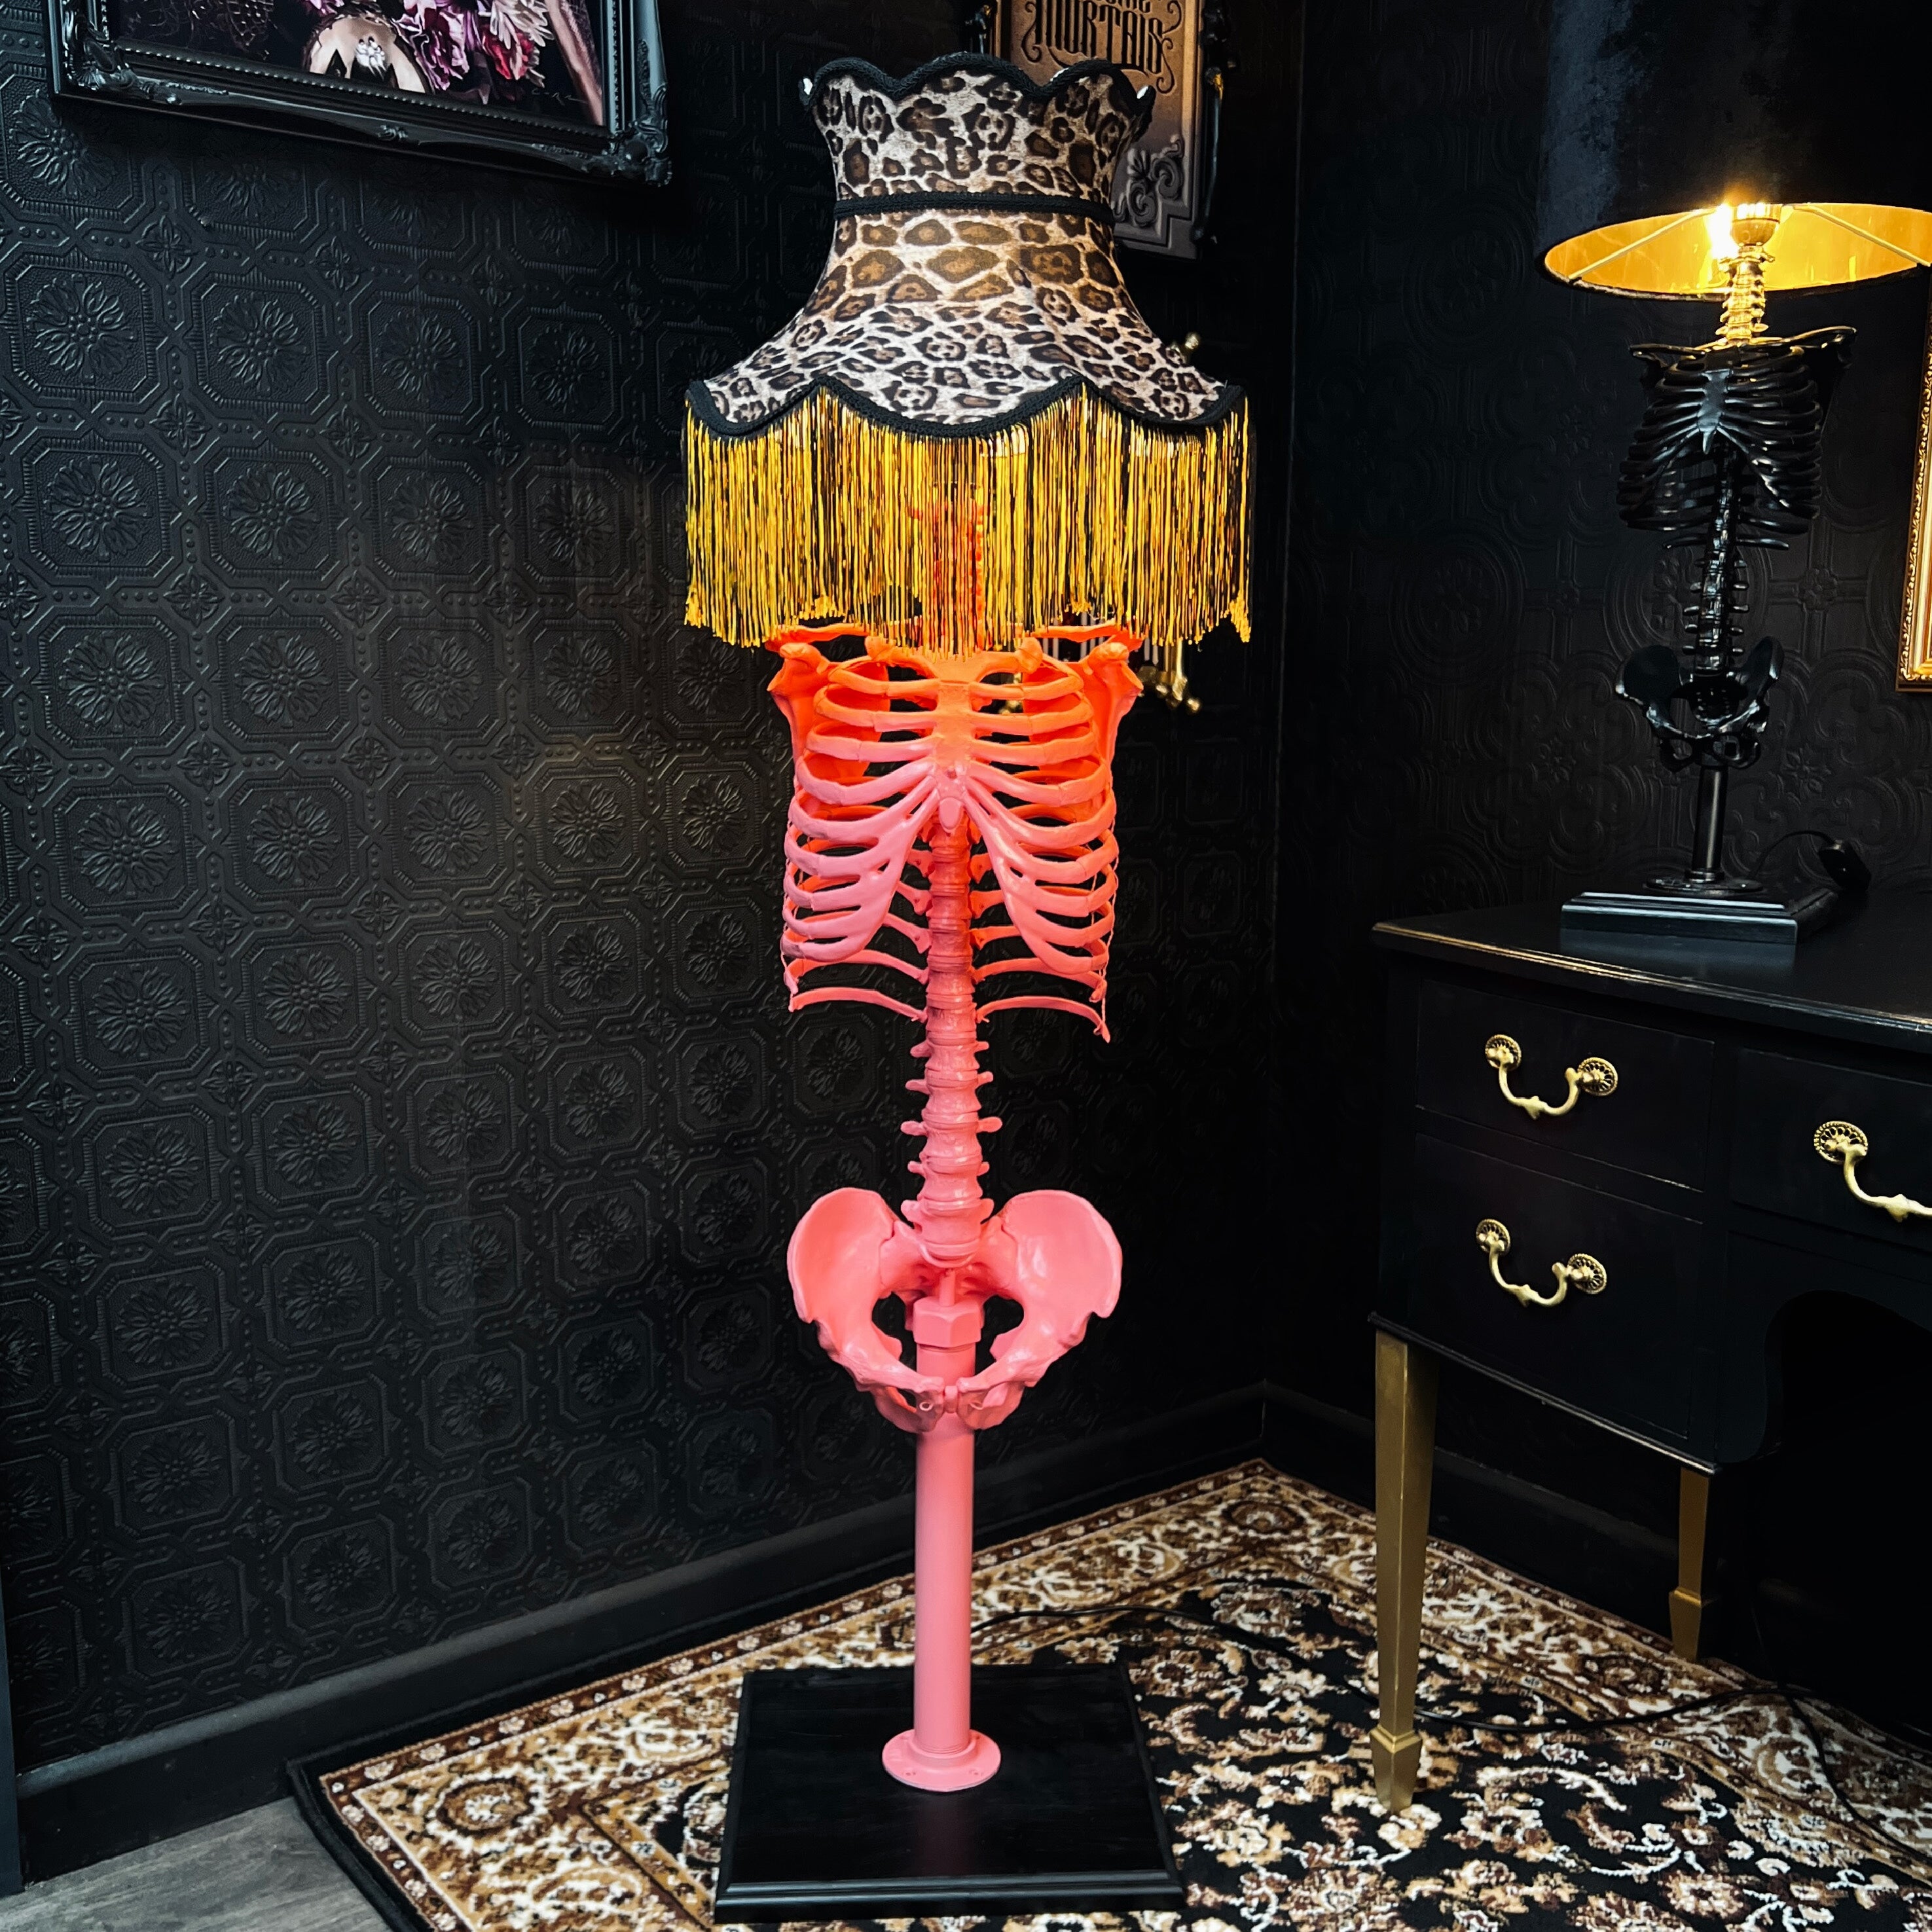 The Skeleton Floor Lamp - Pink Edition